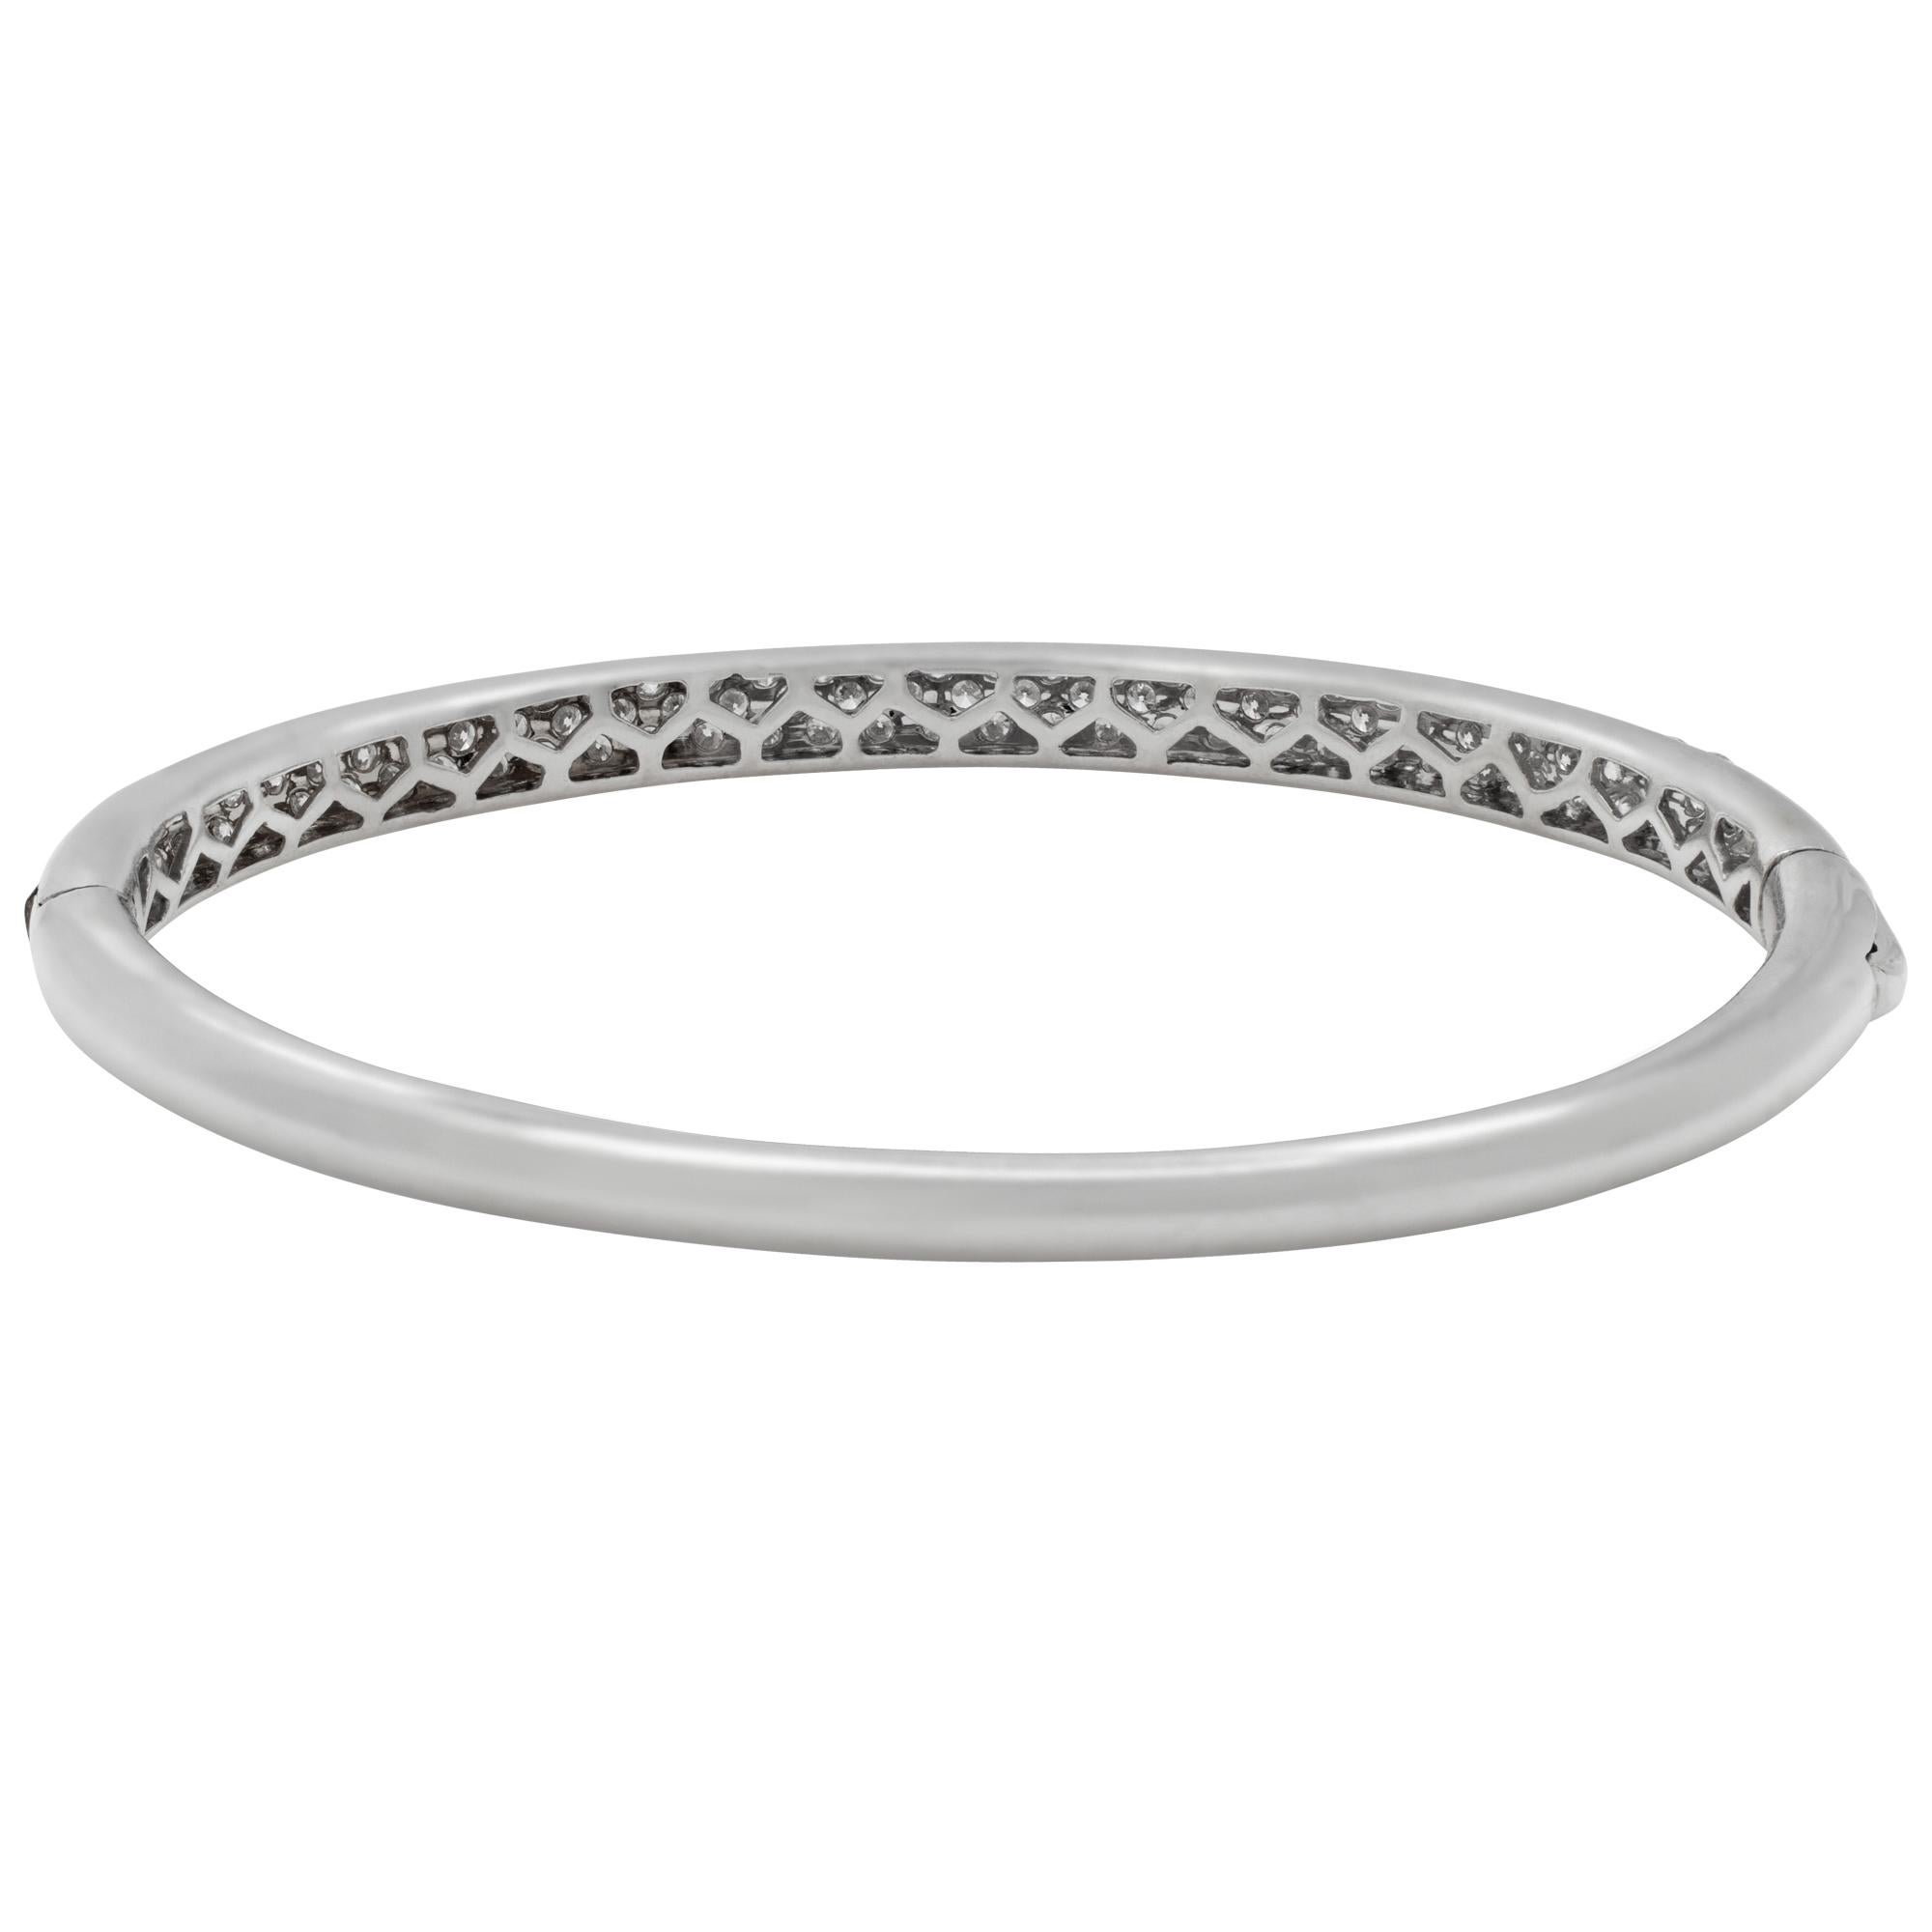 White gold diamond semi eternity bangle In Excellent Condition For Sale In Surfside, FL